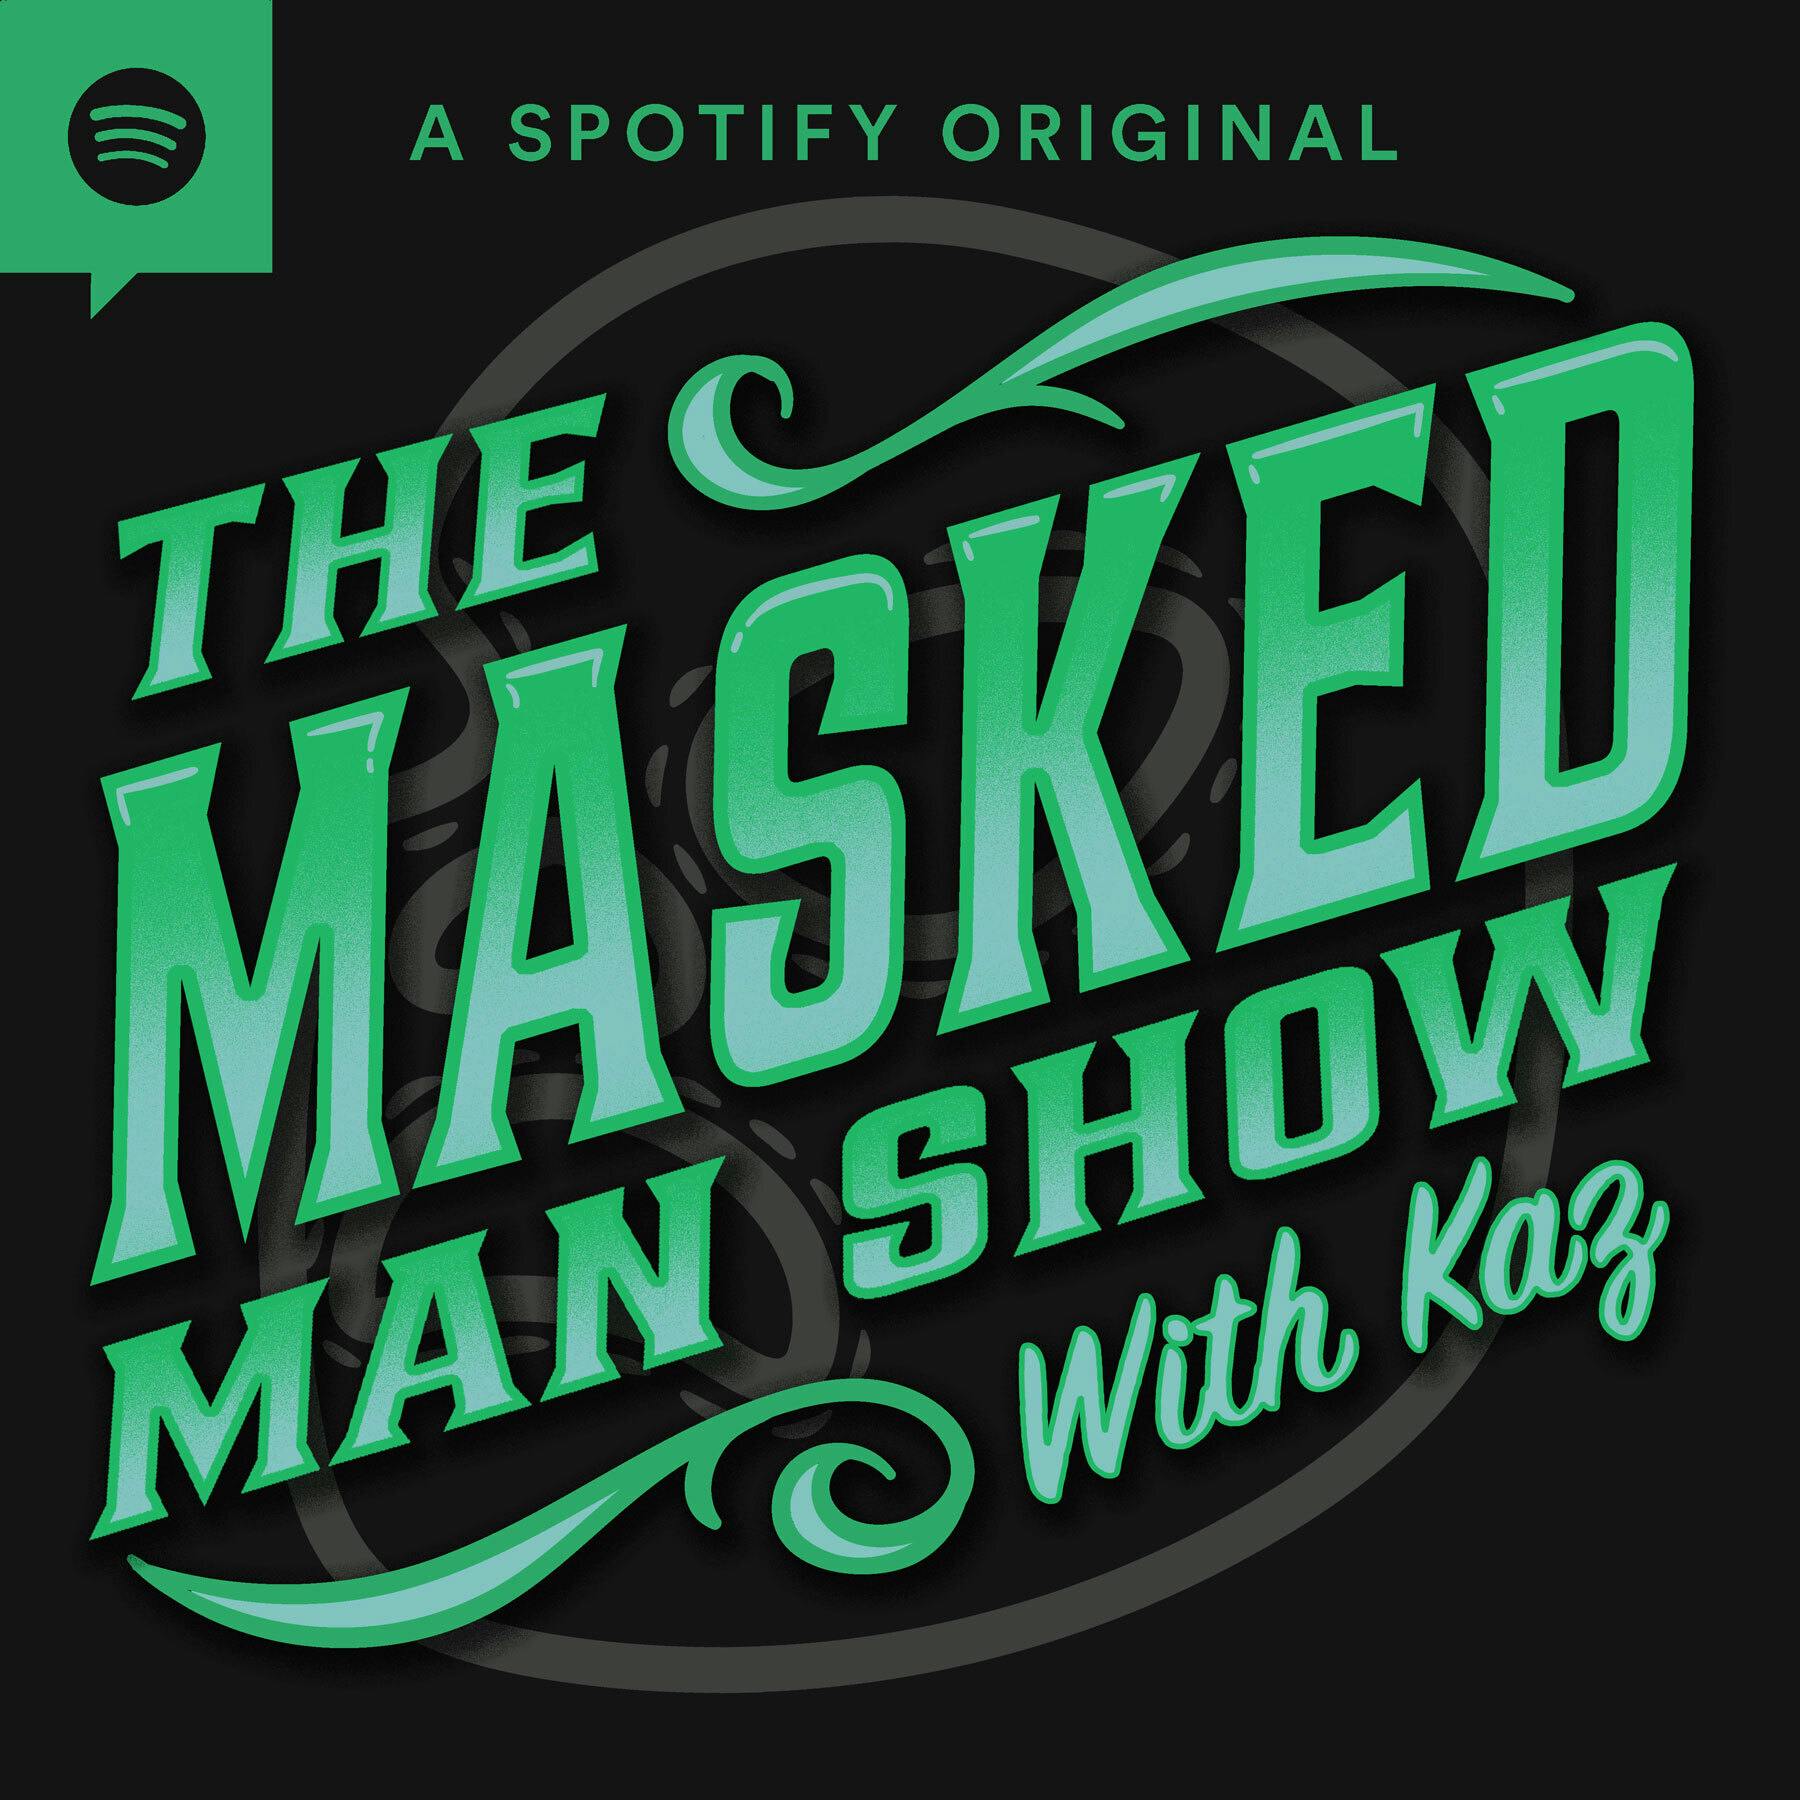 The Bloodline Reloaded, Plus a New Wyatt Family on the Horizon | The Masked Man Show